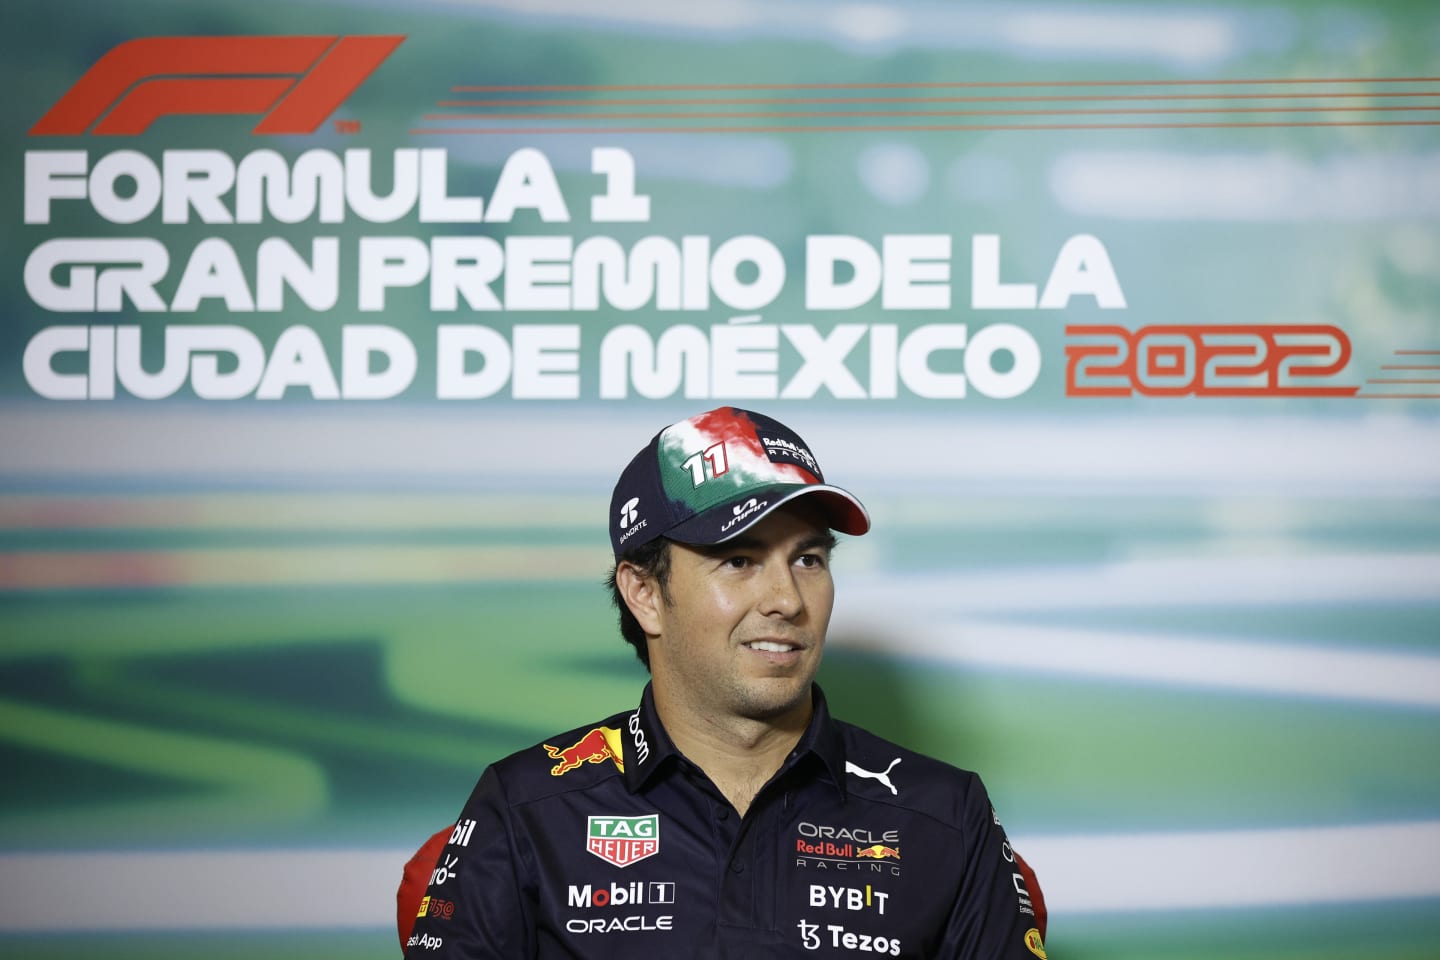 MEXICO CITY, MEXICO - OCTOBER 27: Sergio Perez of Mexico and Oracle Red Bull Racing attends the Drivers Press Conference during previews ahead of the F1 Grand Prix of Mexico at Autodromo Hermanos Rodriguez on October 27, 2022 in Mexico City, Mexico. (Photo by Jared C. Tilton/Getty Images)